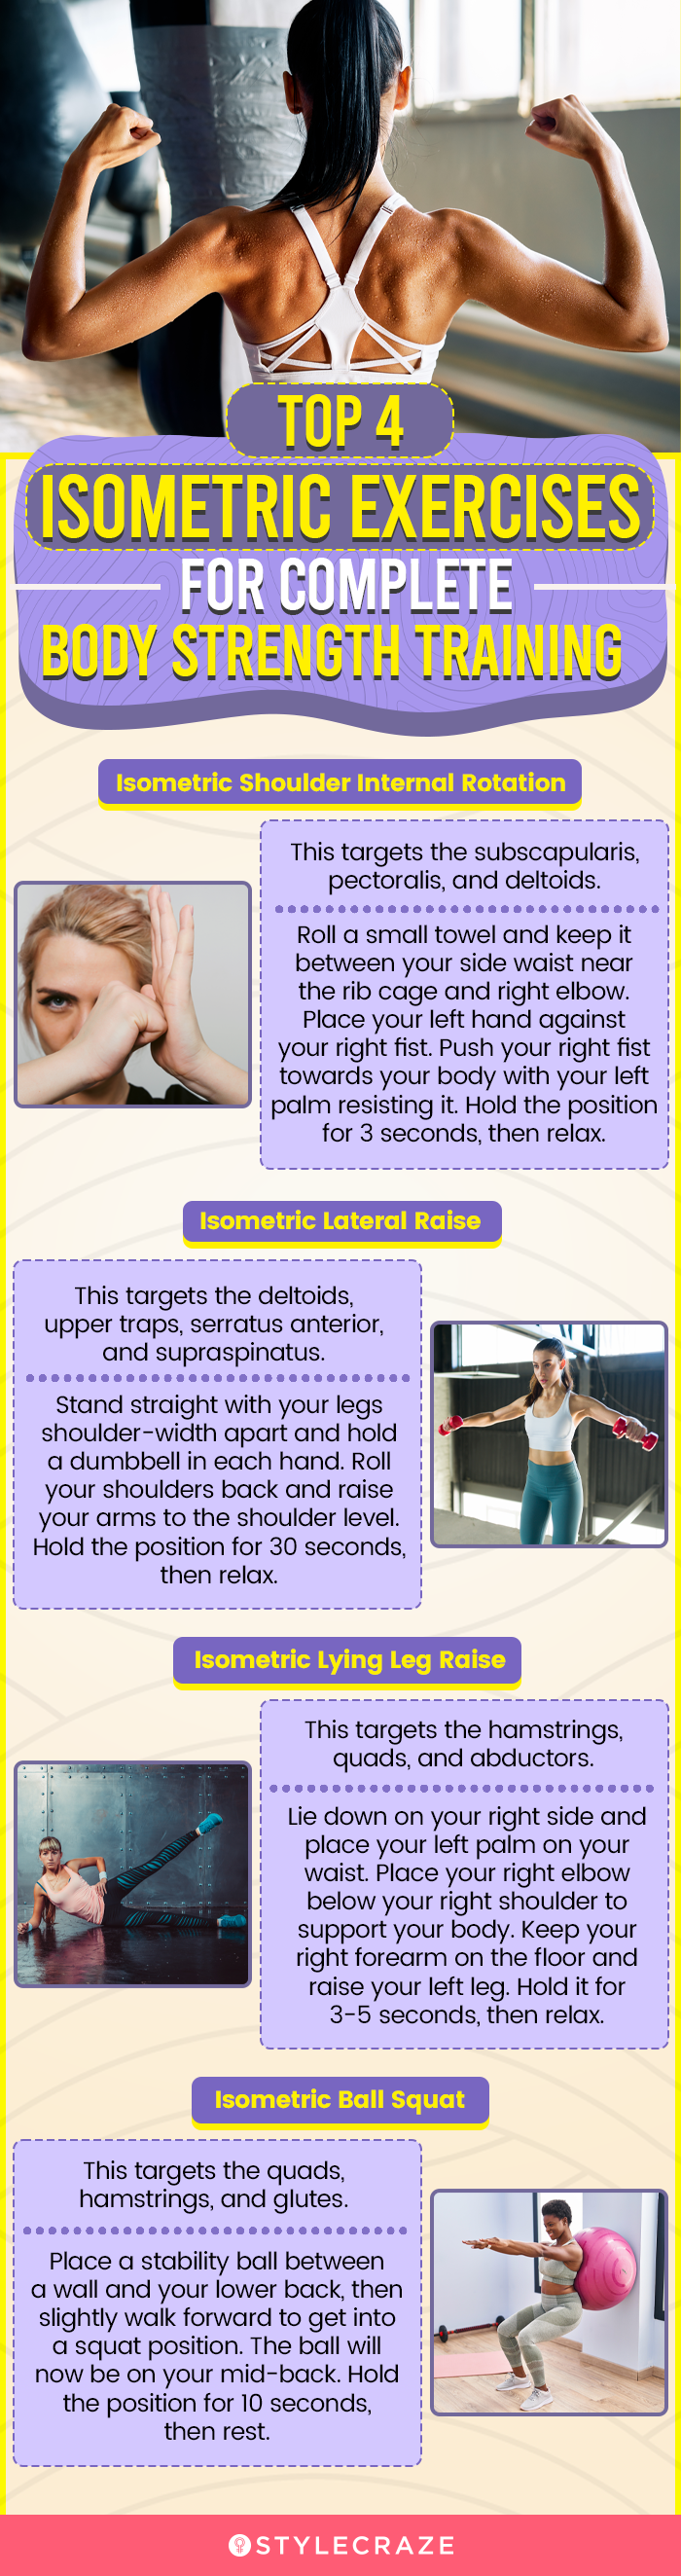 top 4 isometric exercises for complete body strength training (infographic)